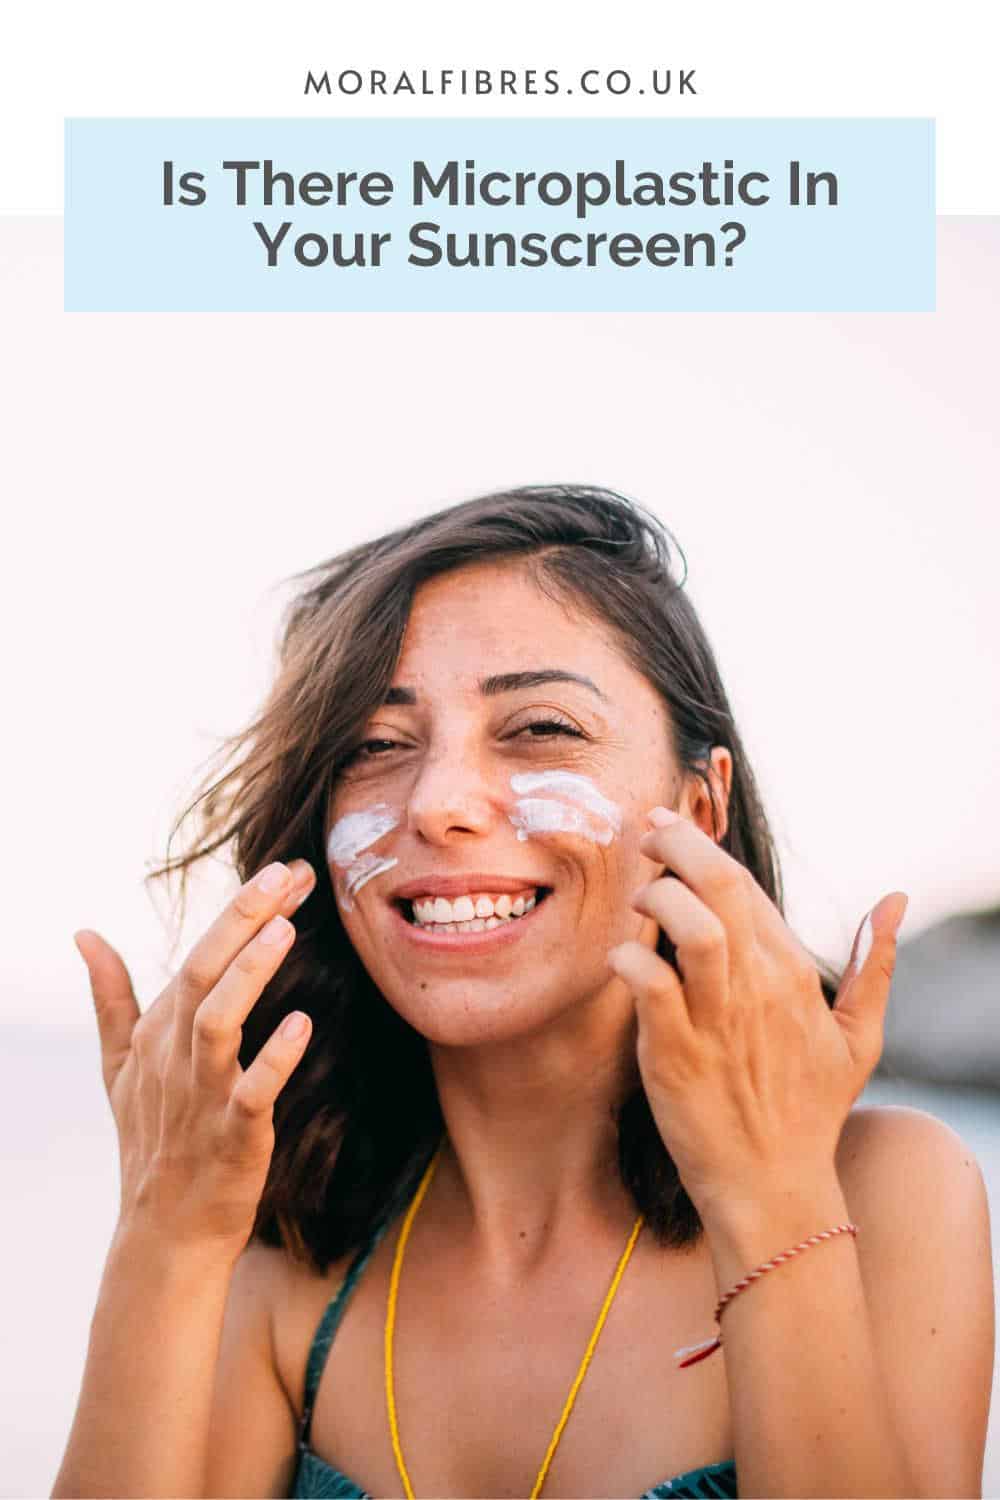 Smiling person on a beach applying sunscreen to their face, with a blue text box that reads does your sunscreen contain microplastic.